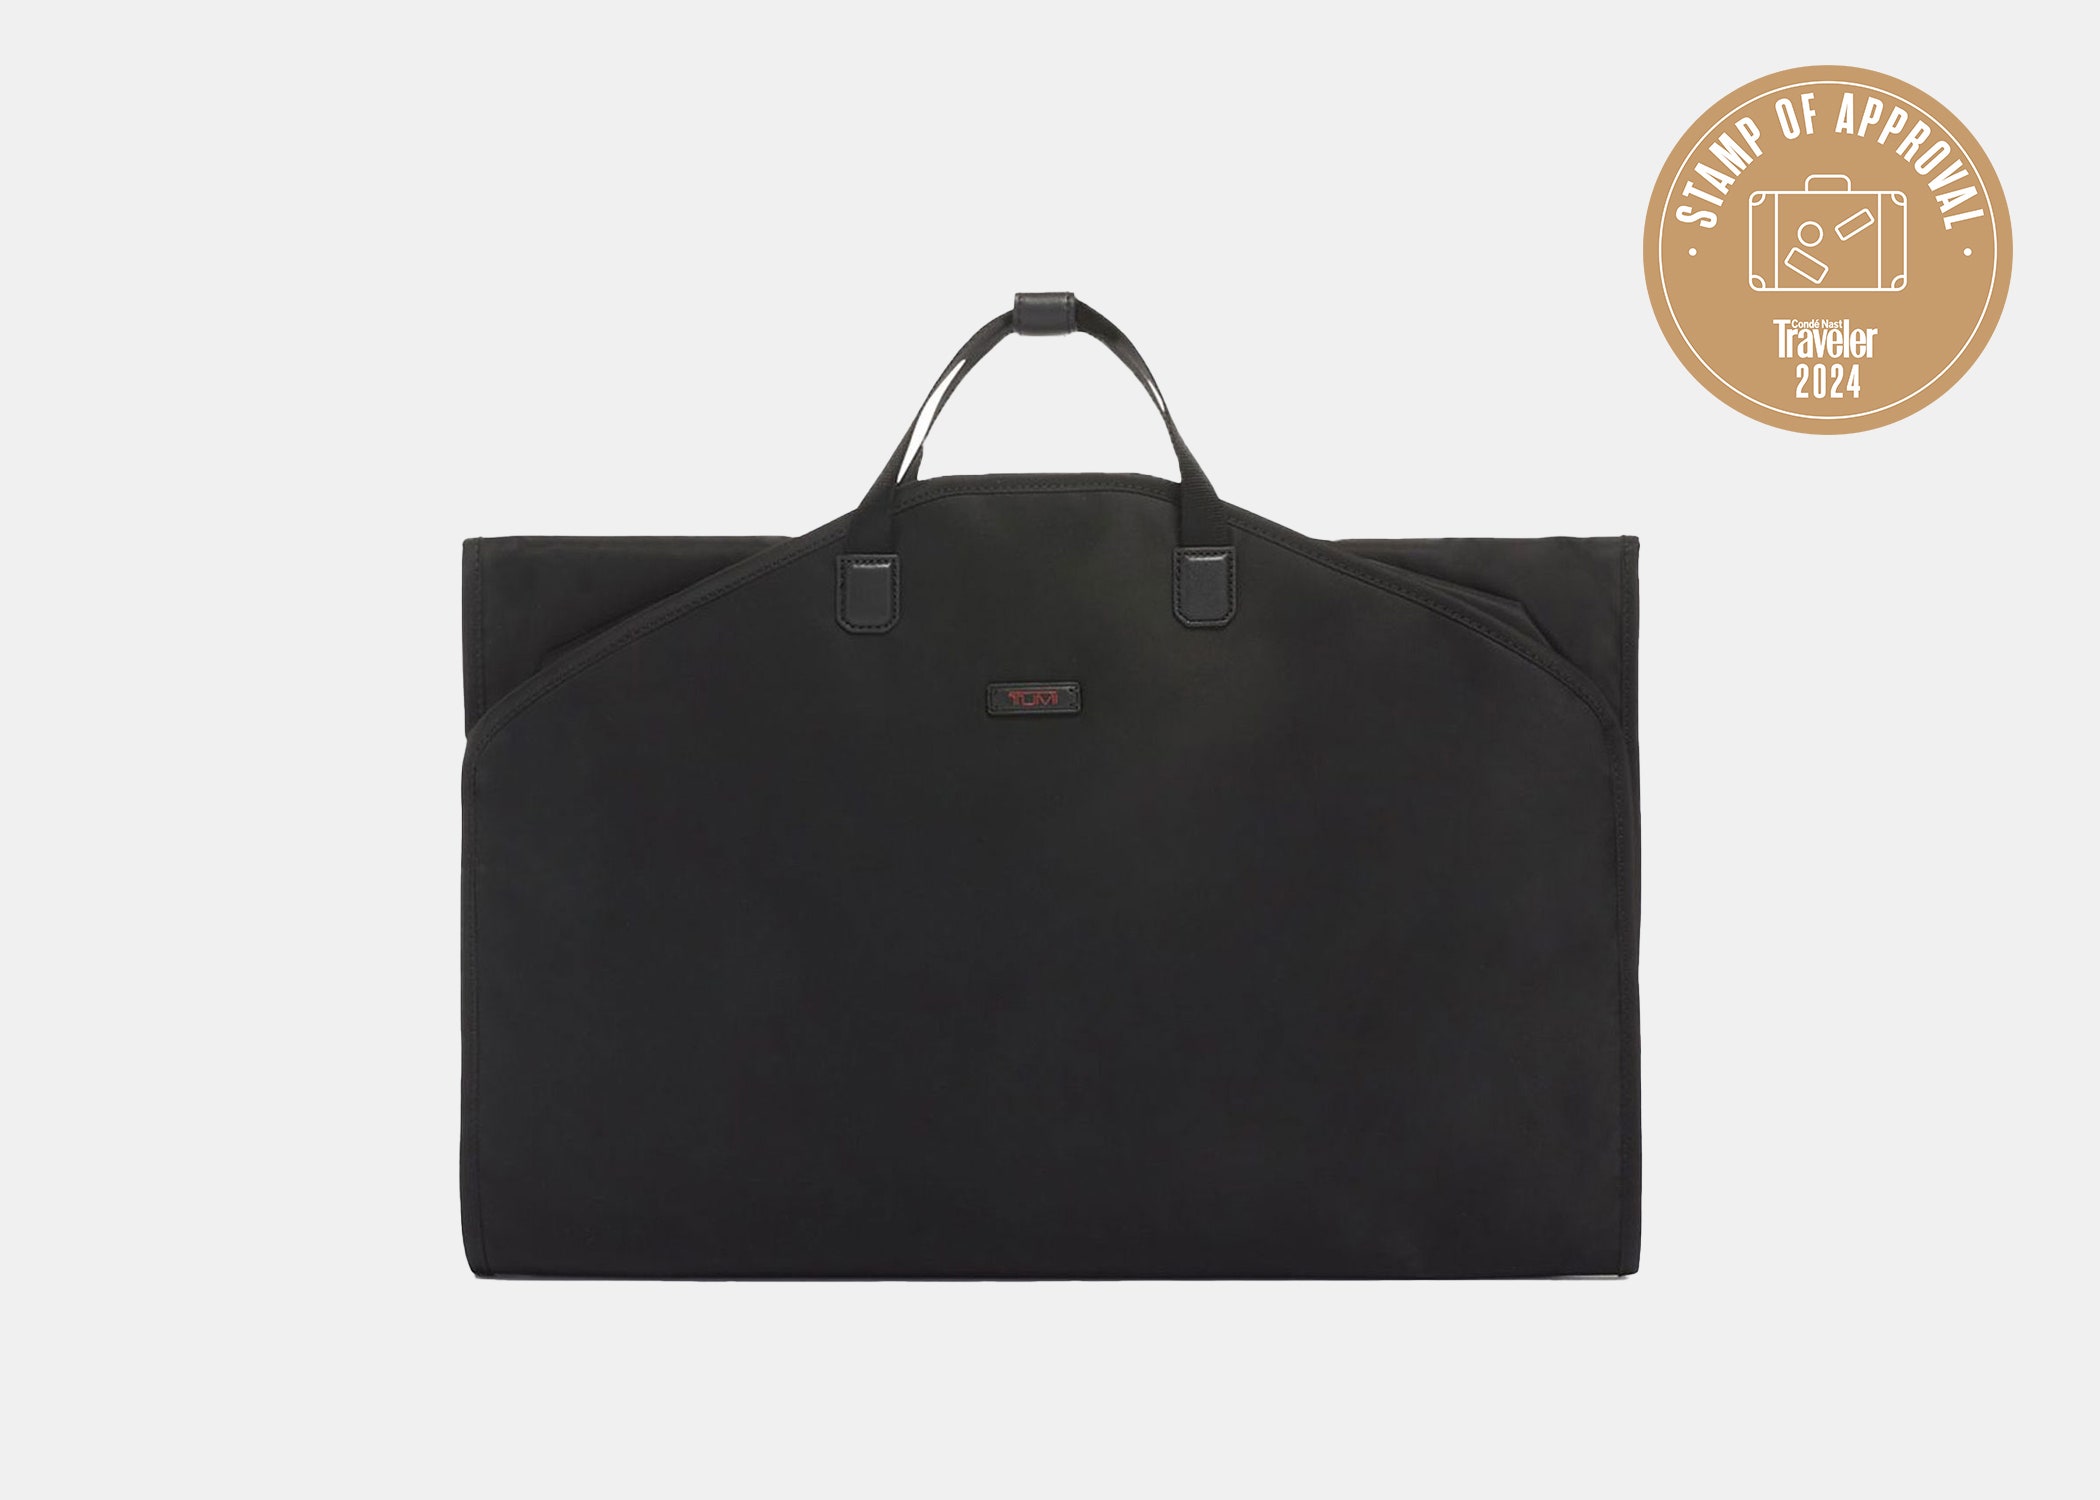 <p><strong>Best durable cover</strong></p> <p>If you're looking for a simple, no-frills garment bag that will last for years to come, look no further than Tumi's garment cover. This one checks all the boxes—it features a top carry handle, has a sturdy zip closure, and is long enough to fit a formal gown or men’s suit. Plus, this nylon garment cover is durable enough to reuse again and again. At just over one pound, this garment cover is lightweight and folds flat for easy packing.</p> <p><strong>Dimensions:</strong> 18" x 12.5" x 1"<br> <strong>Weight:</strong> 1.1 lbs.</p> $175, Nordstrom. <a href="https://www.nordstrom.com/s/tumi-garment-cover/5535704">Get it now!</a><p>Sign up to receive the latest news, expert tips, and inspiration on all things travel</p><a href="https://www.cntraveler.com/newsletter/the-daily?sourceCode=msnsend">Inspire Me</a>